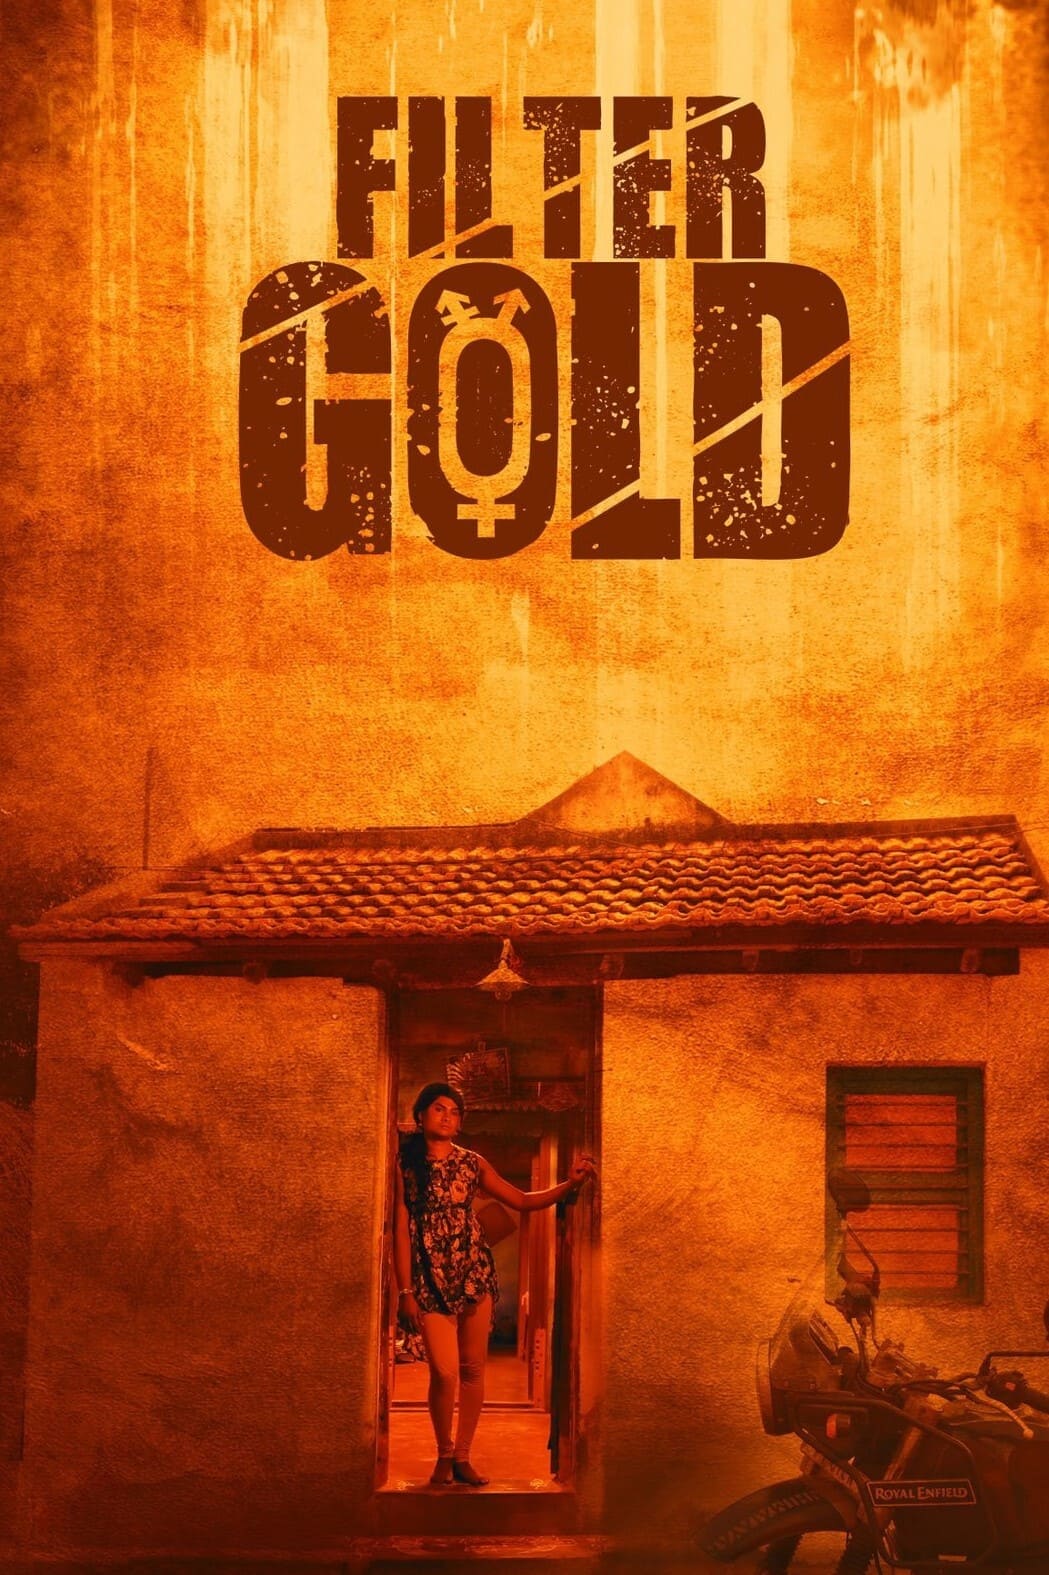 Poster for the movie "Filter Gold"